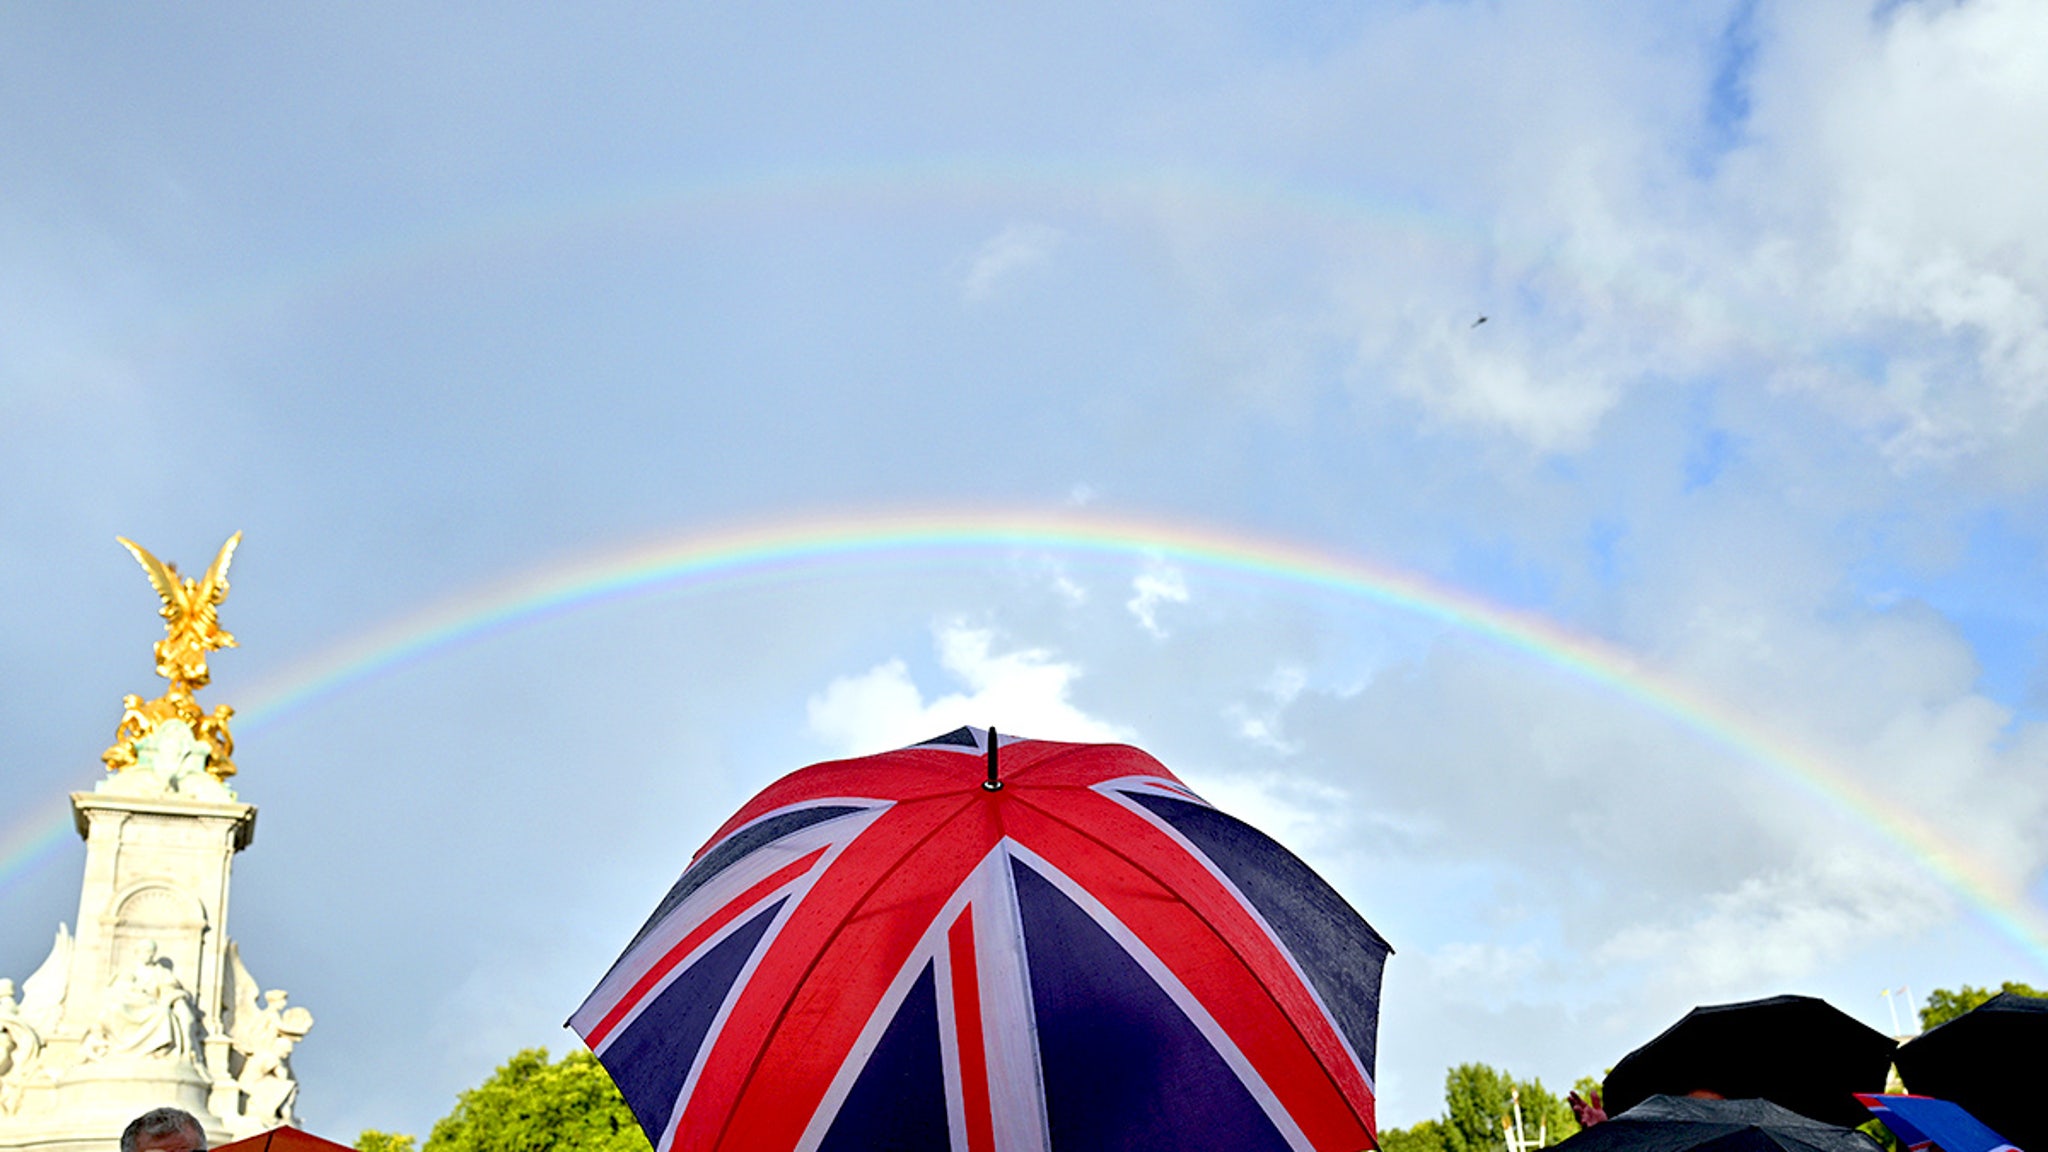 Double Rainbow Spotted Over Buckingham Palace Just Before Queen Elizabeth’s Death